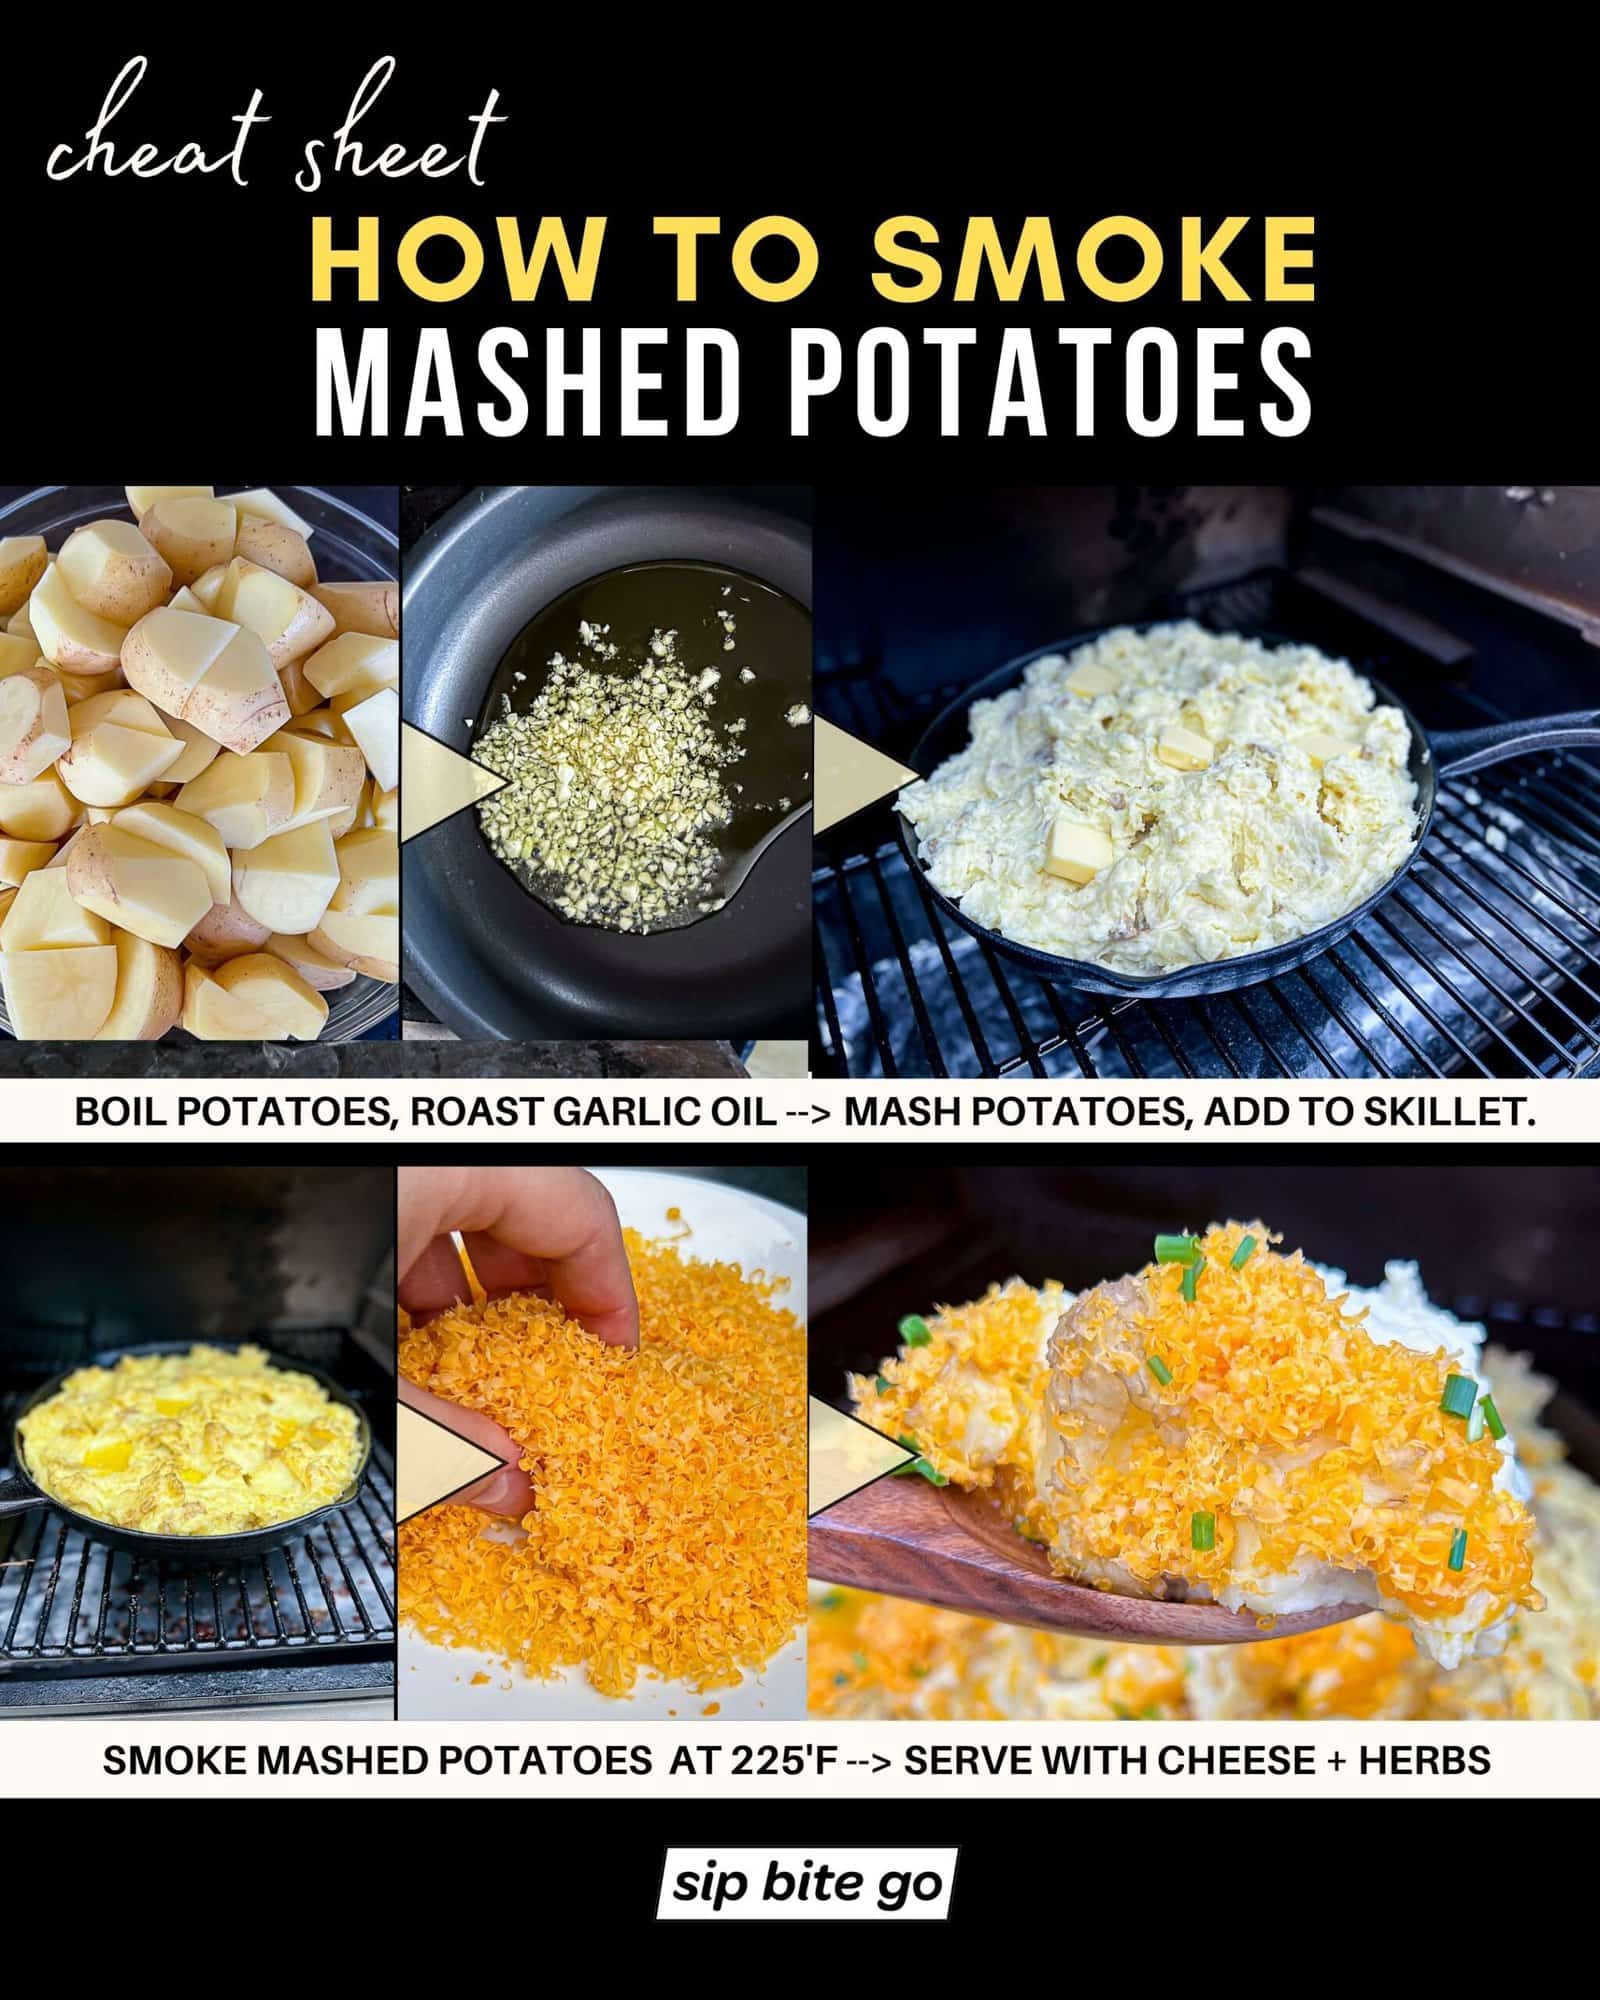 Infographic with recipe steps for how to smoke garlic mashed potatoes on the Traeger pellet grill